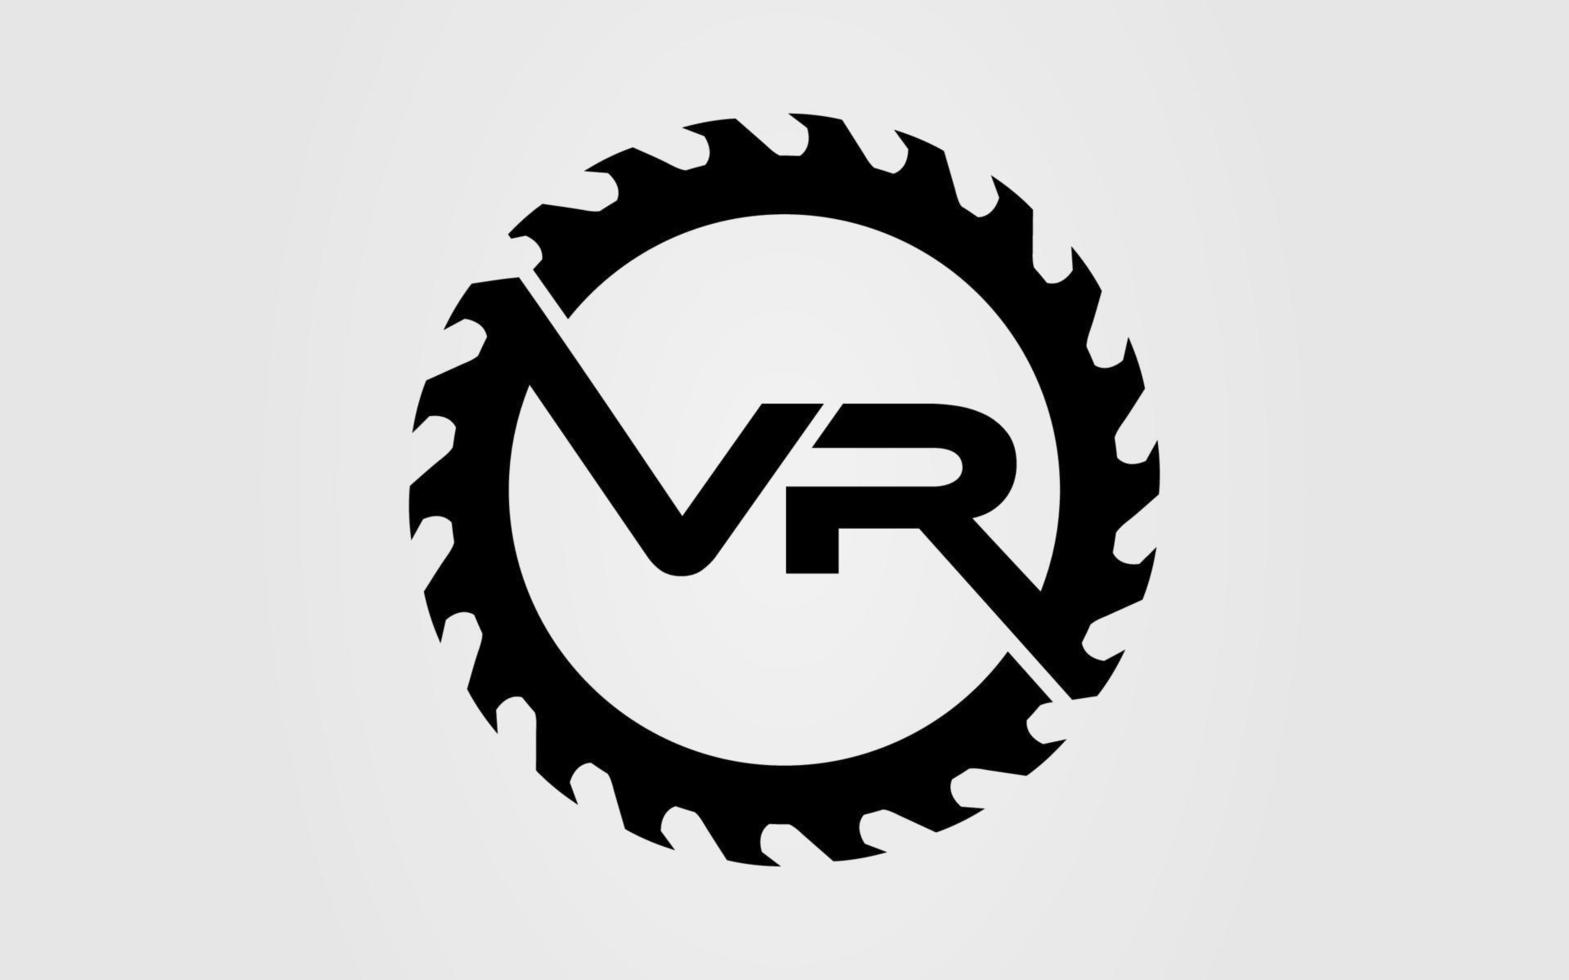 Logo initial v r with circle saw icon template vector